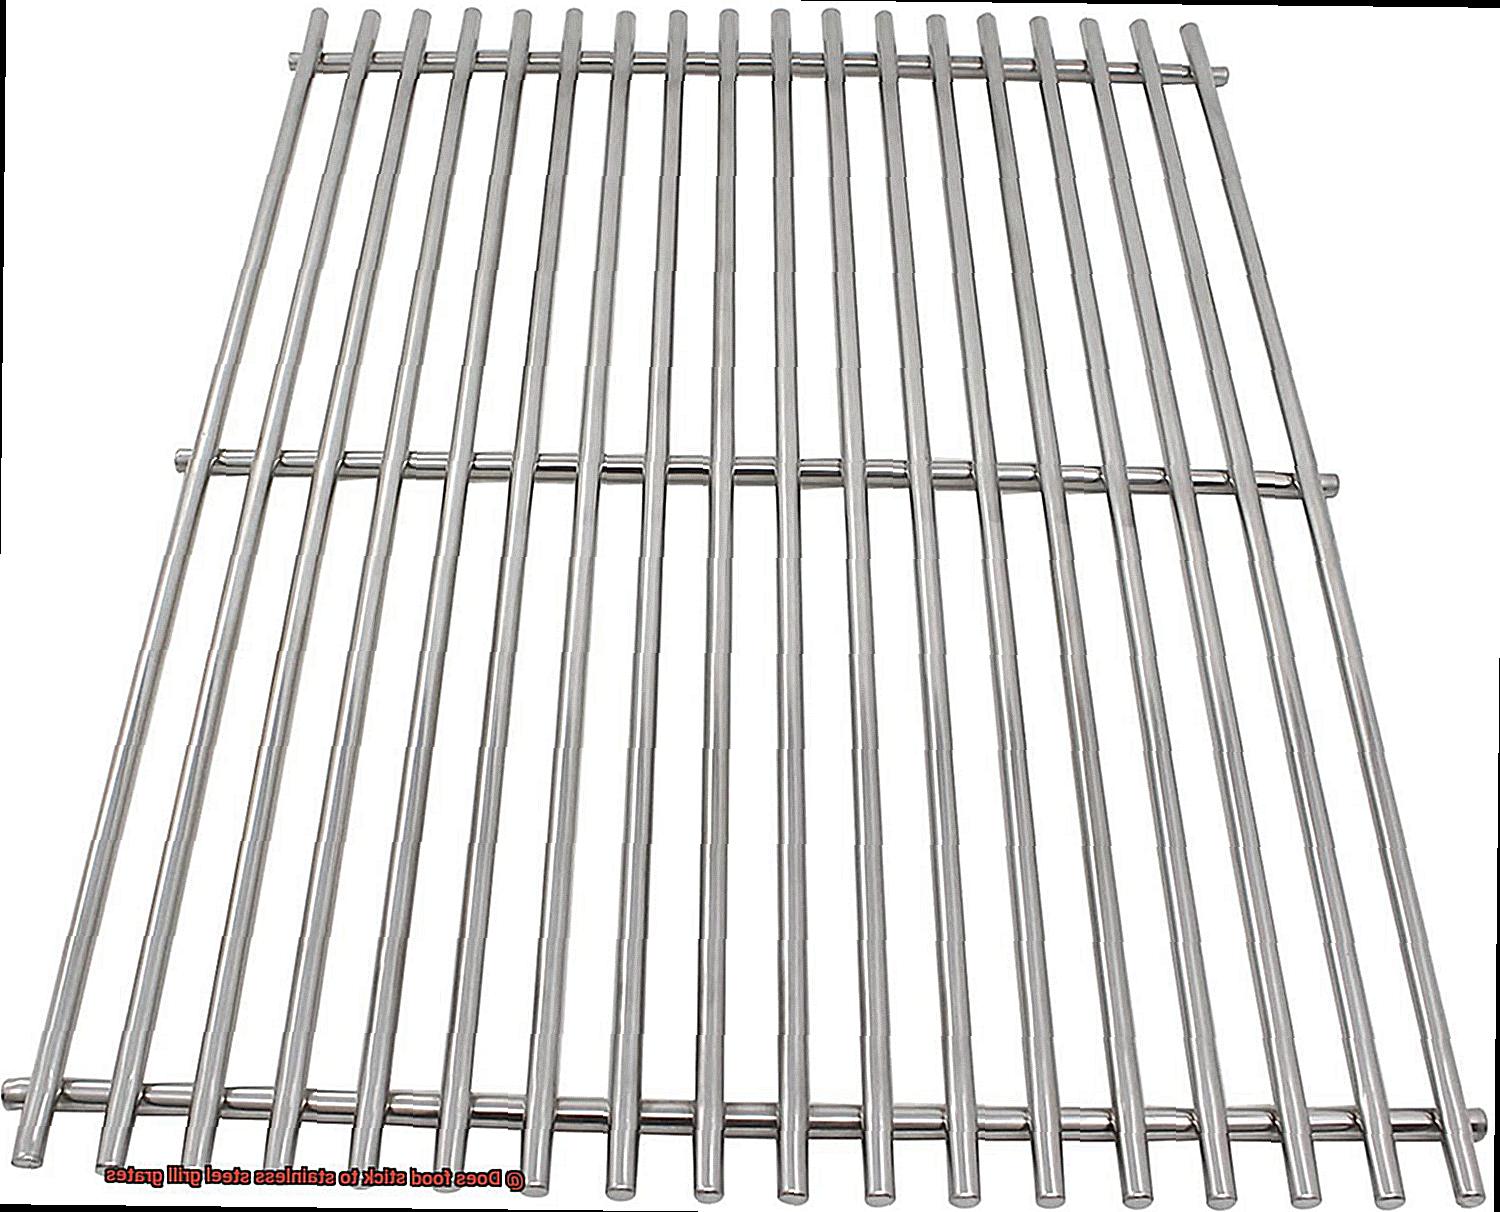 Does food stick to stainless steel grill grates-2